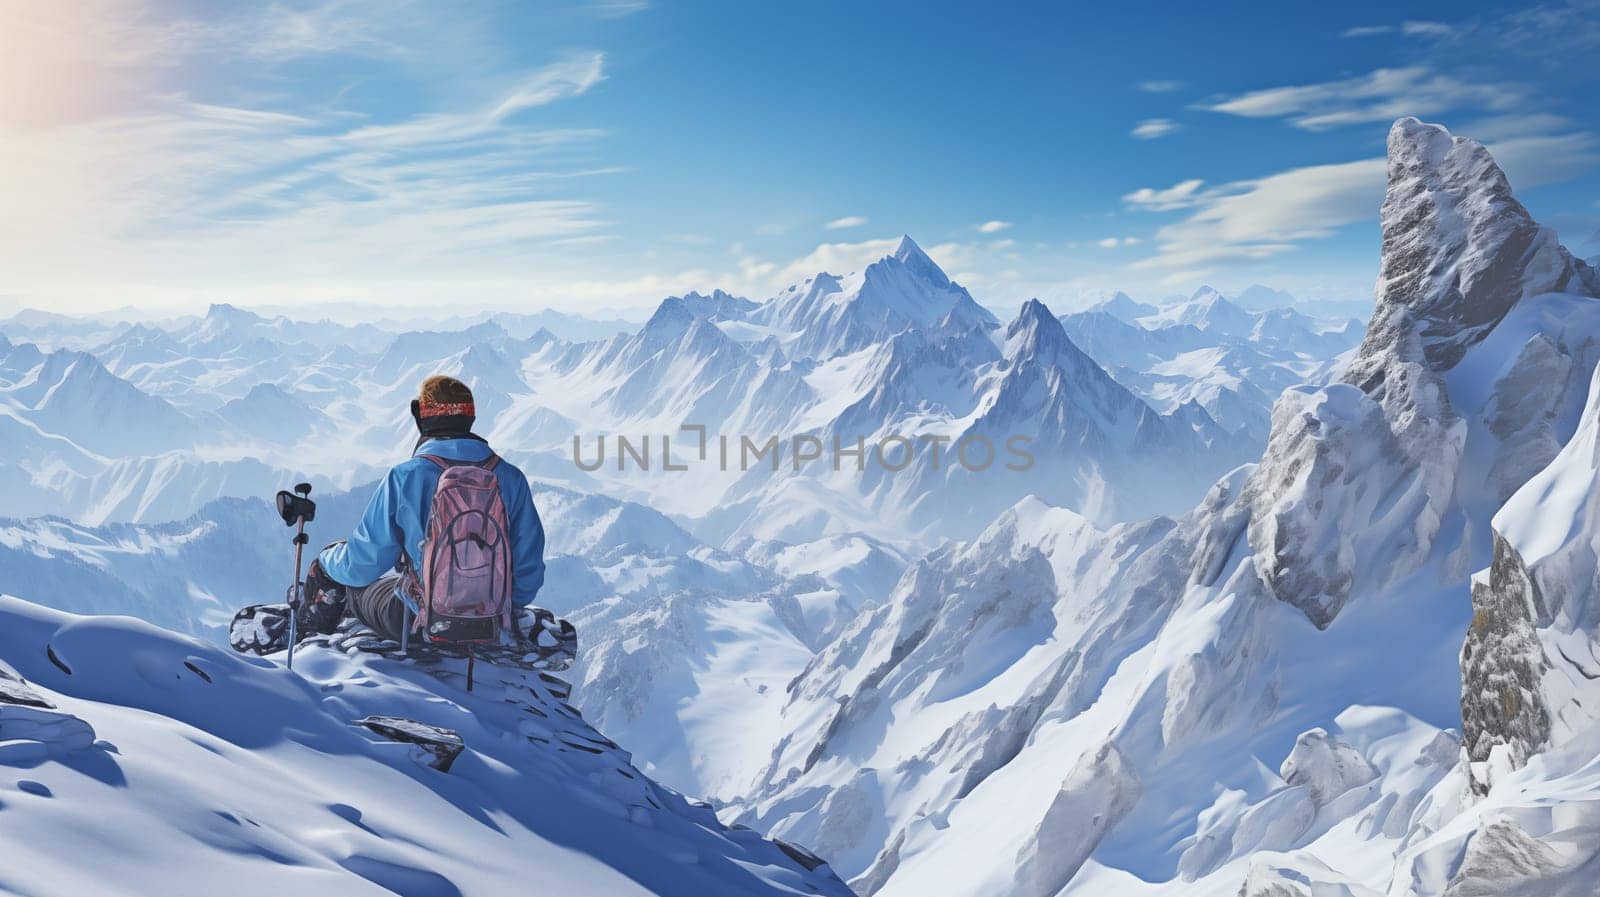 A hiker gazing at vast snow-covered mountains.